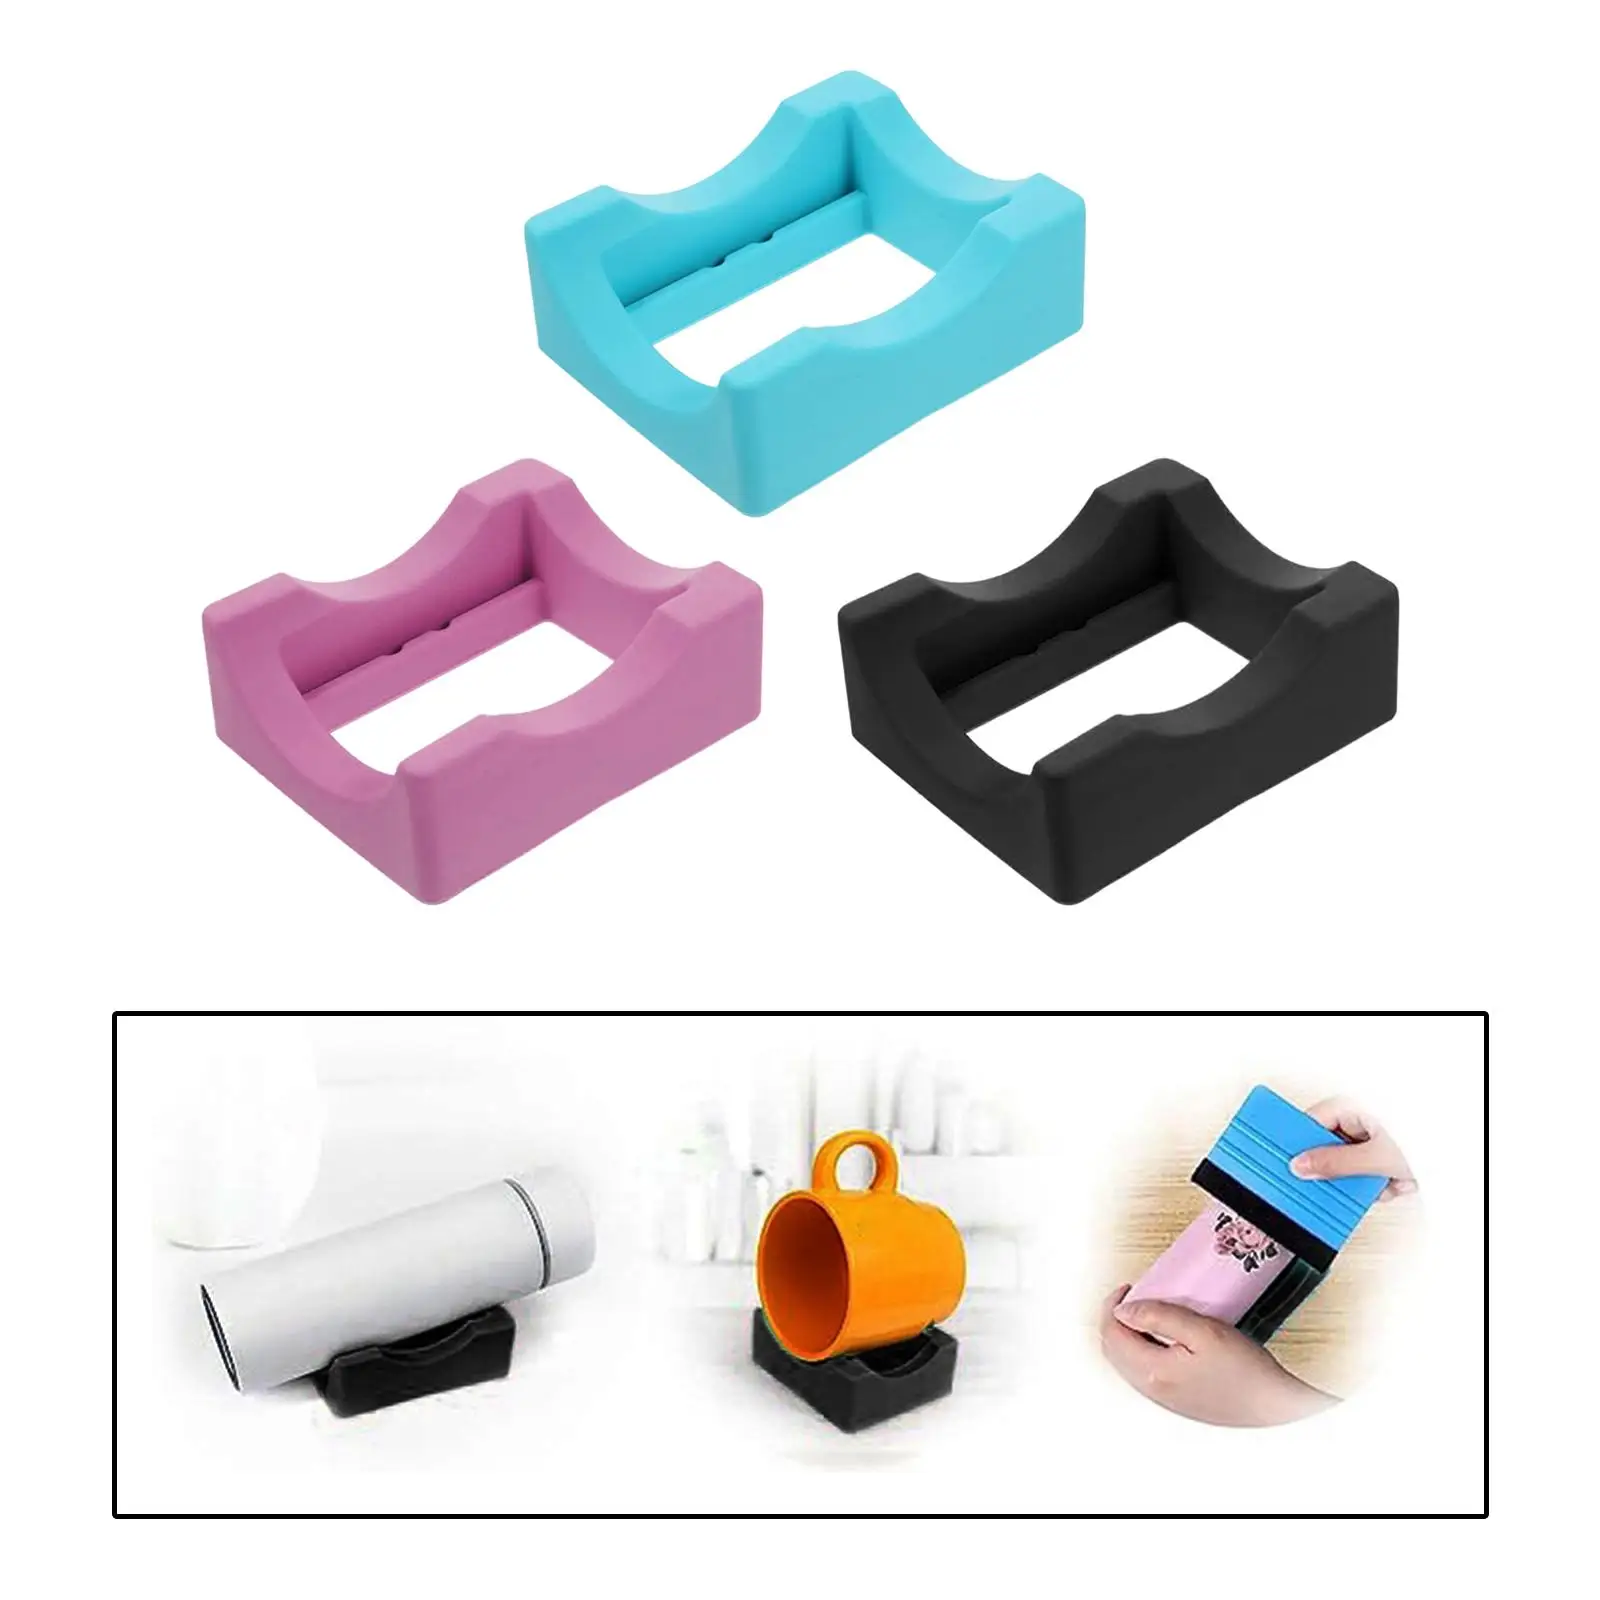 Silicone Cup Holder Mug Silicone Cup Cradle Glass Cup Slot Tumbler Holder  Cup Cradle for Crafting Tumbler Crafts Decals Holder